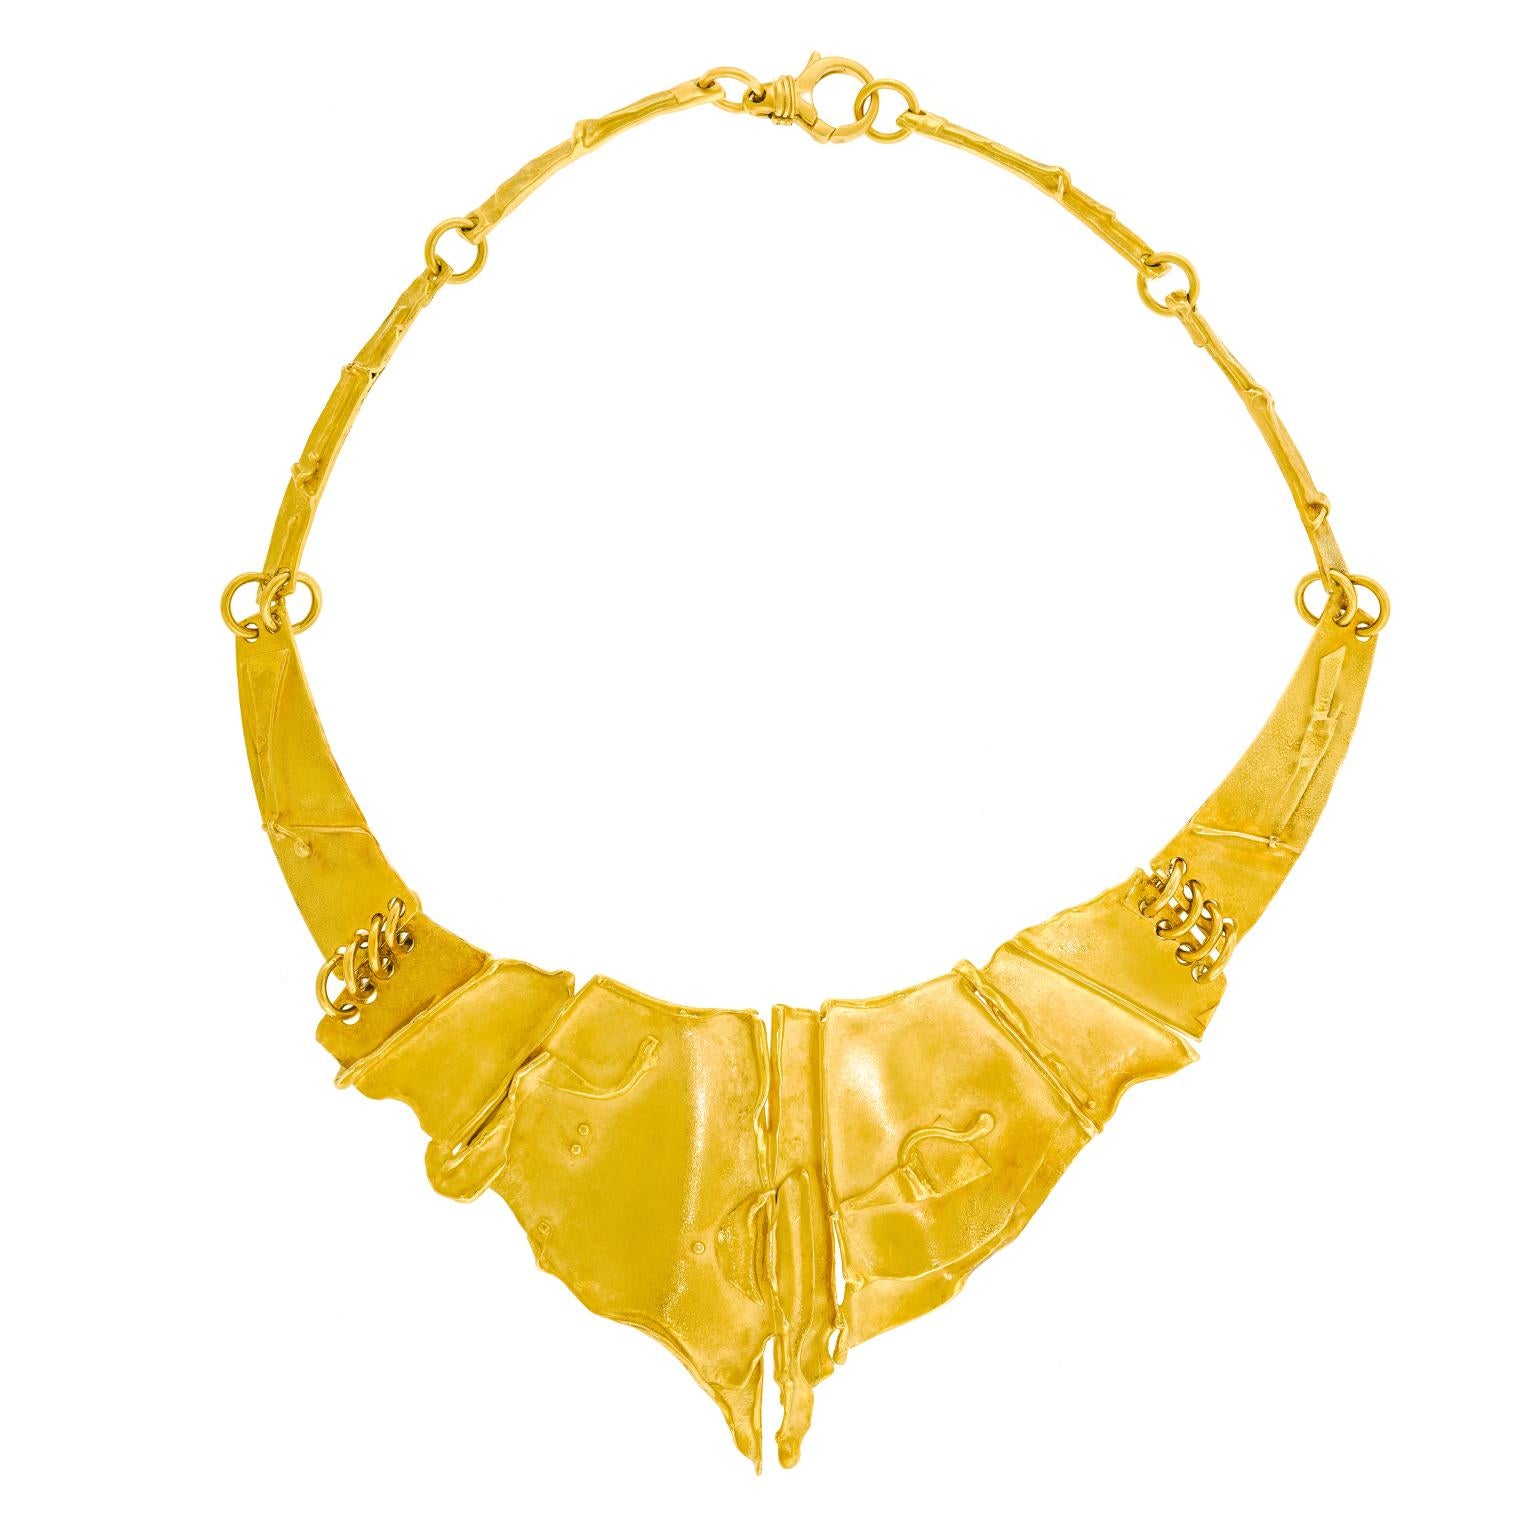 Modernist Swiss Modern Organo-Chic Gold Necklace For Sale